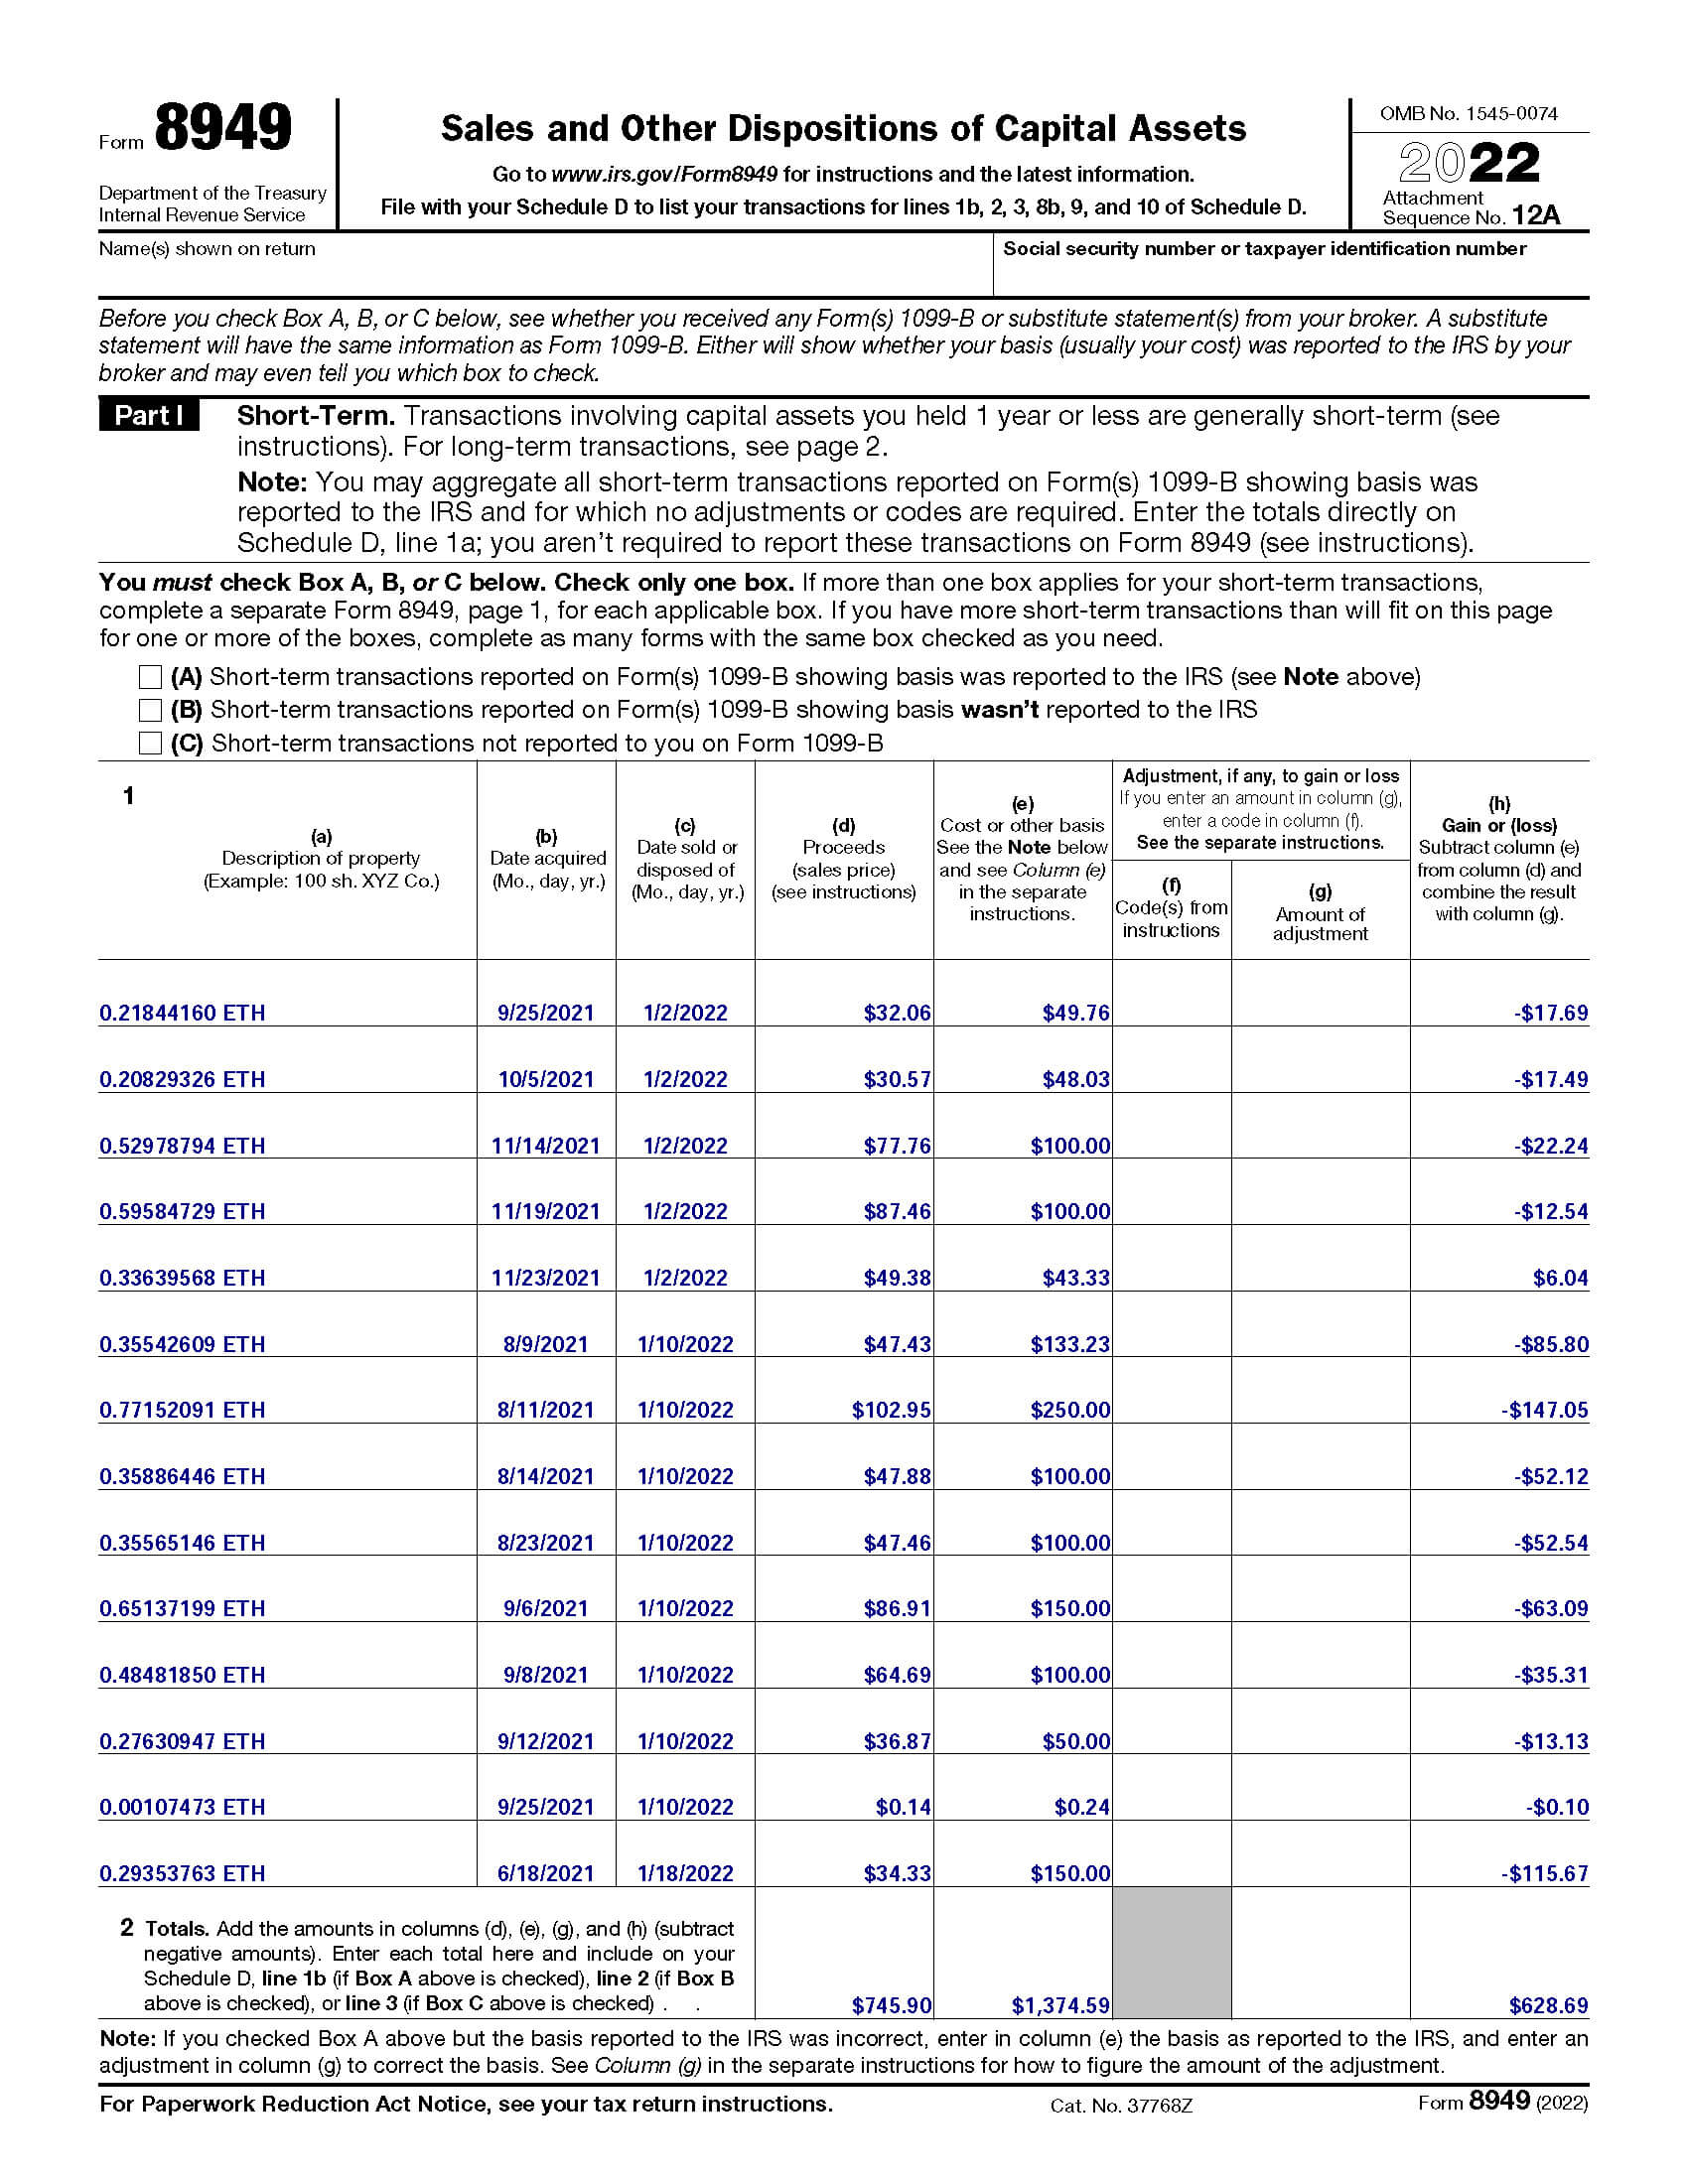 Form 8949 template example 